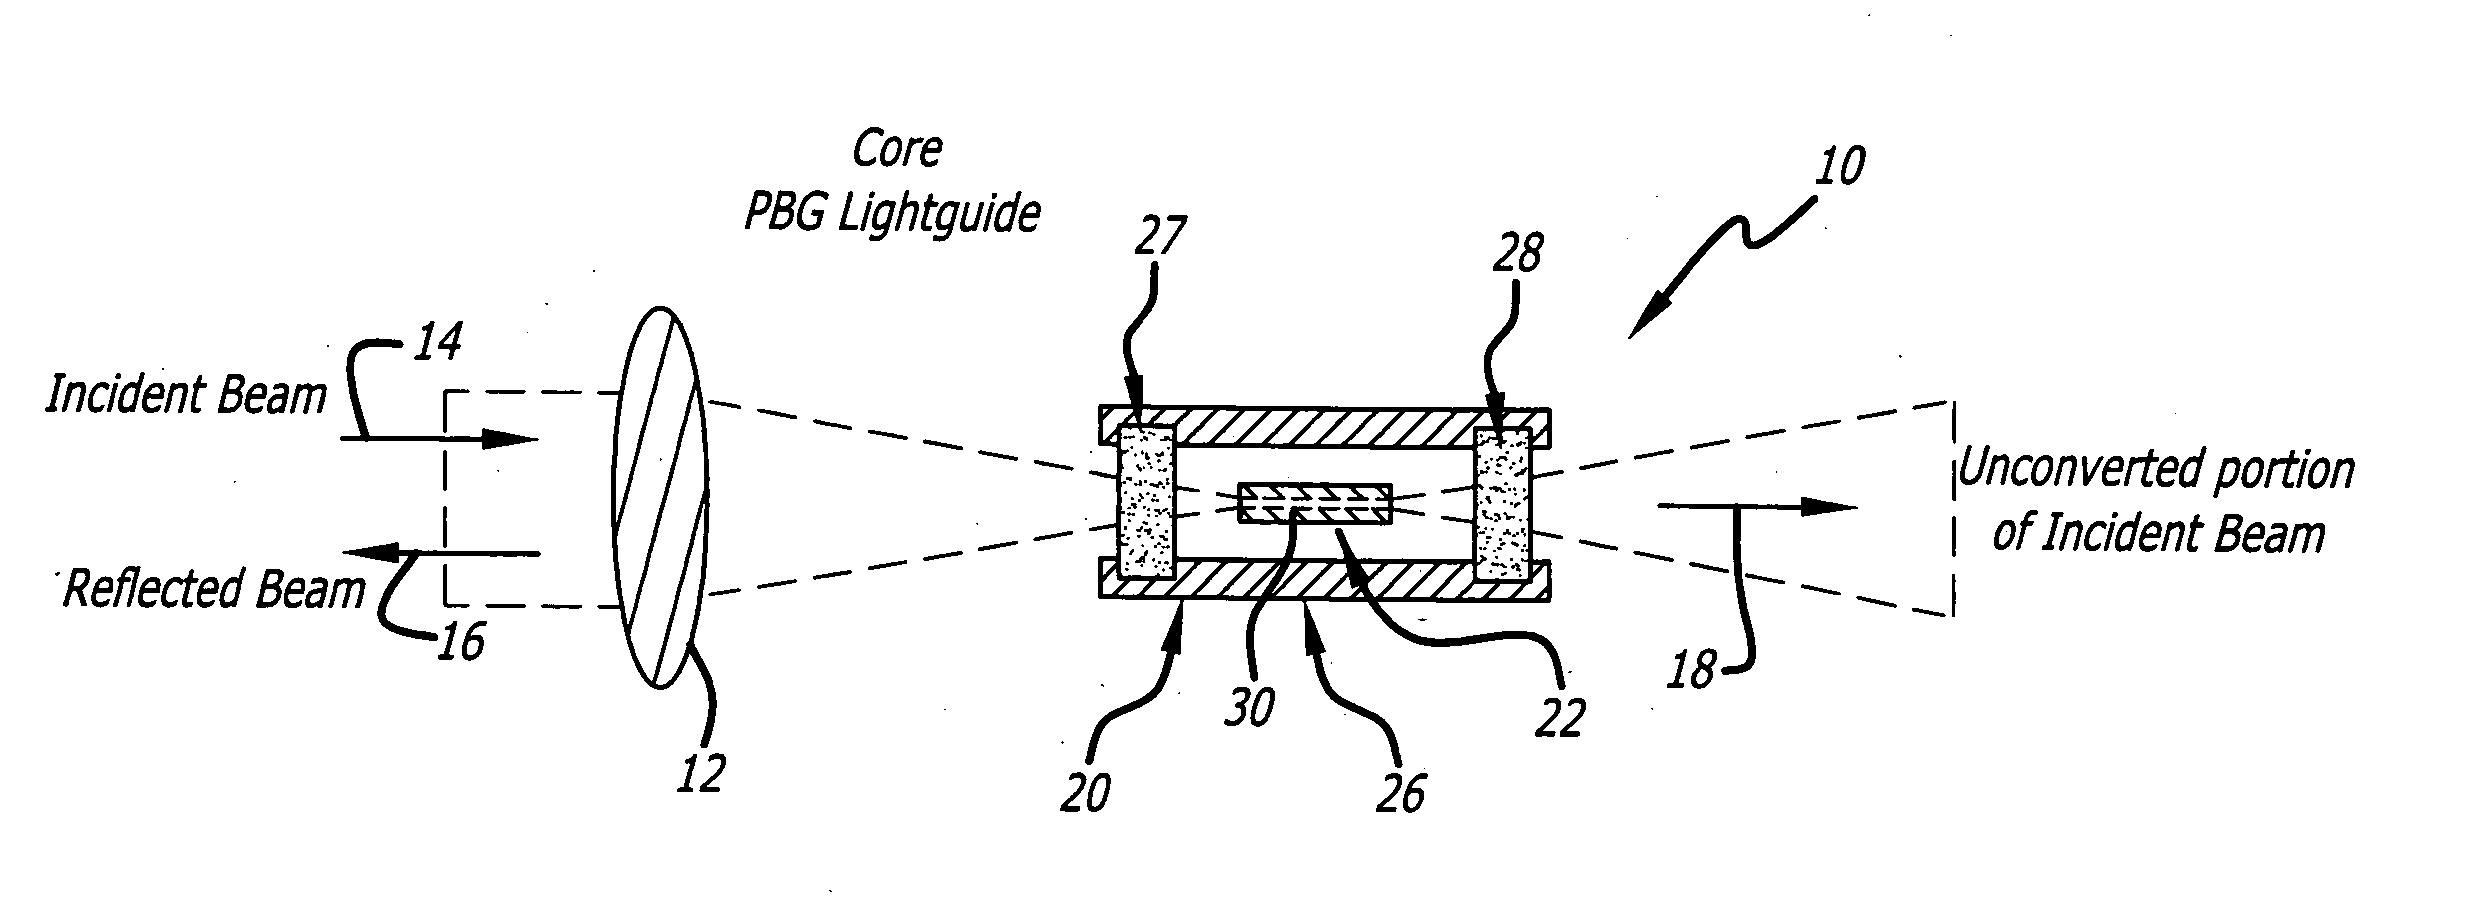 Stimulated brillouin scattering phase conjugate mirror utilizing photonic bandgap guide and method